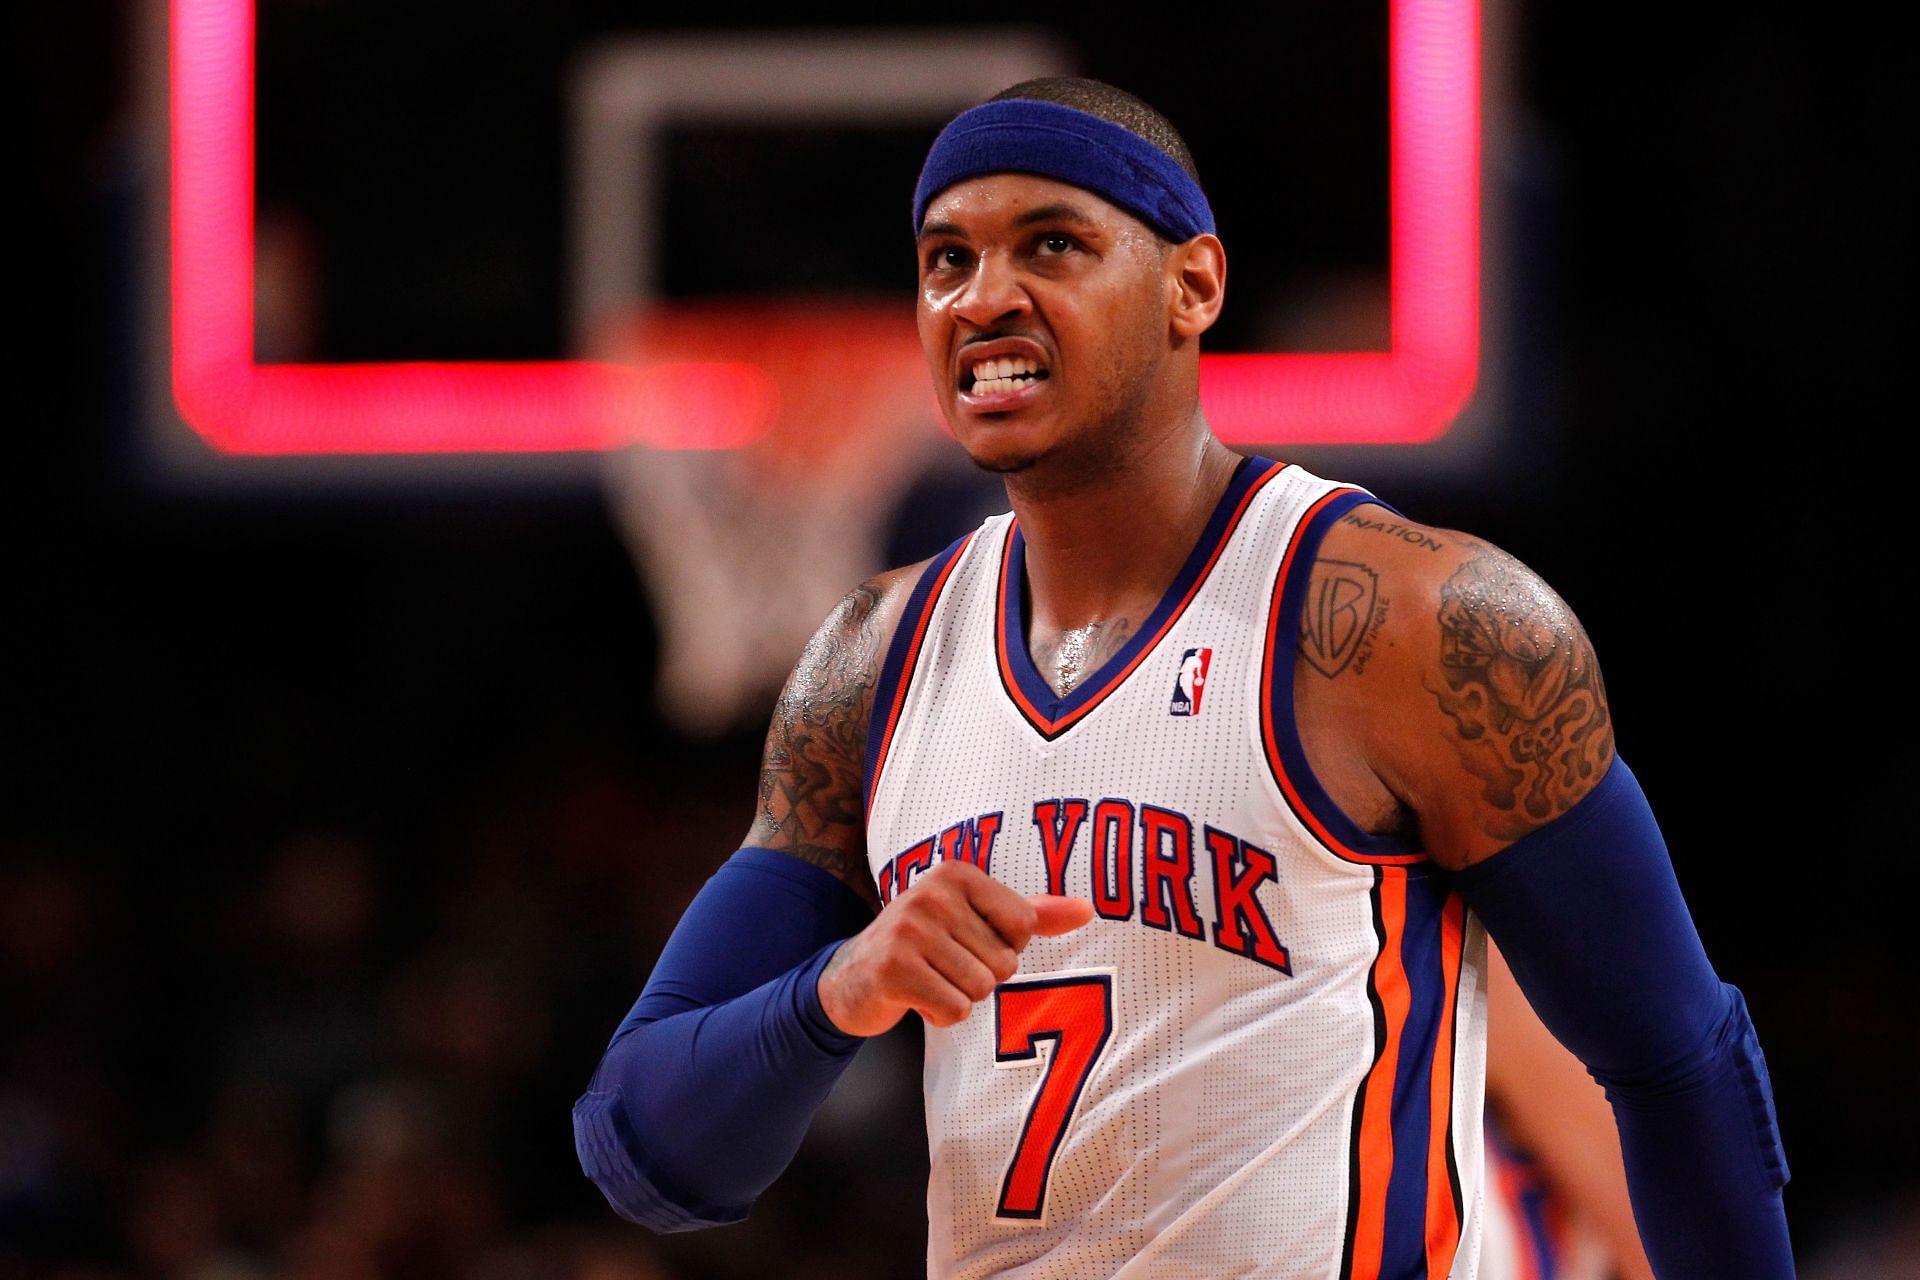 Hometown hero Carmelo Anthony once played for New York, but did not find success.